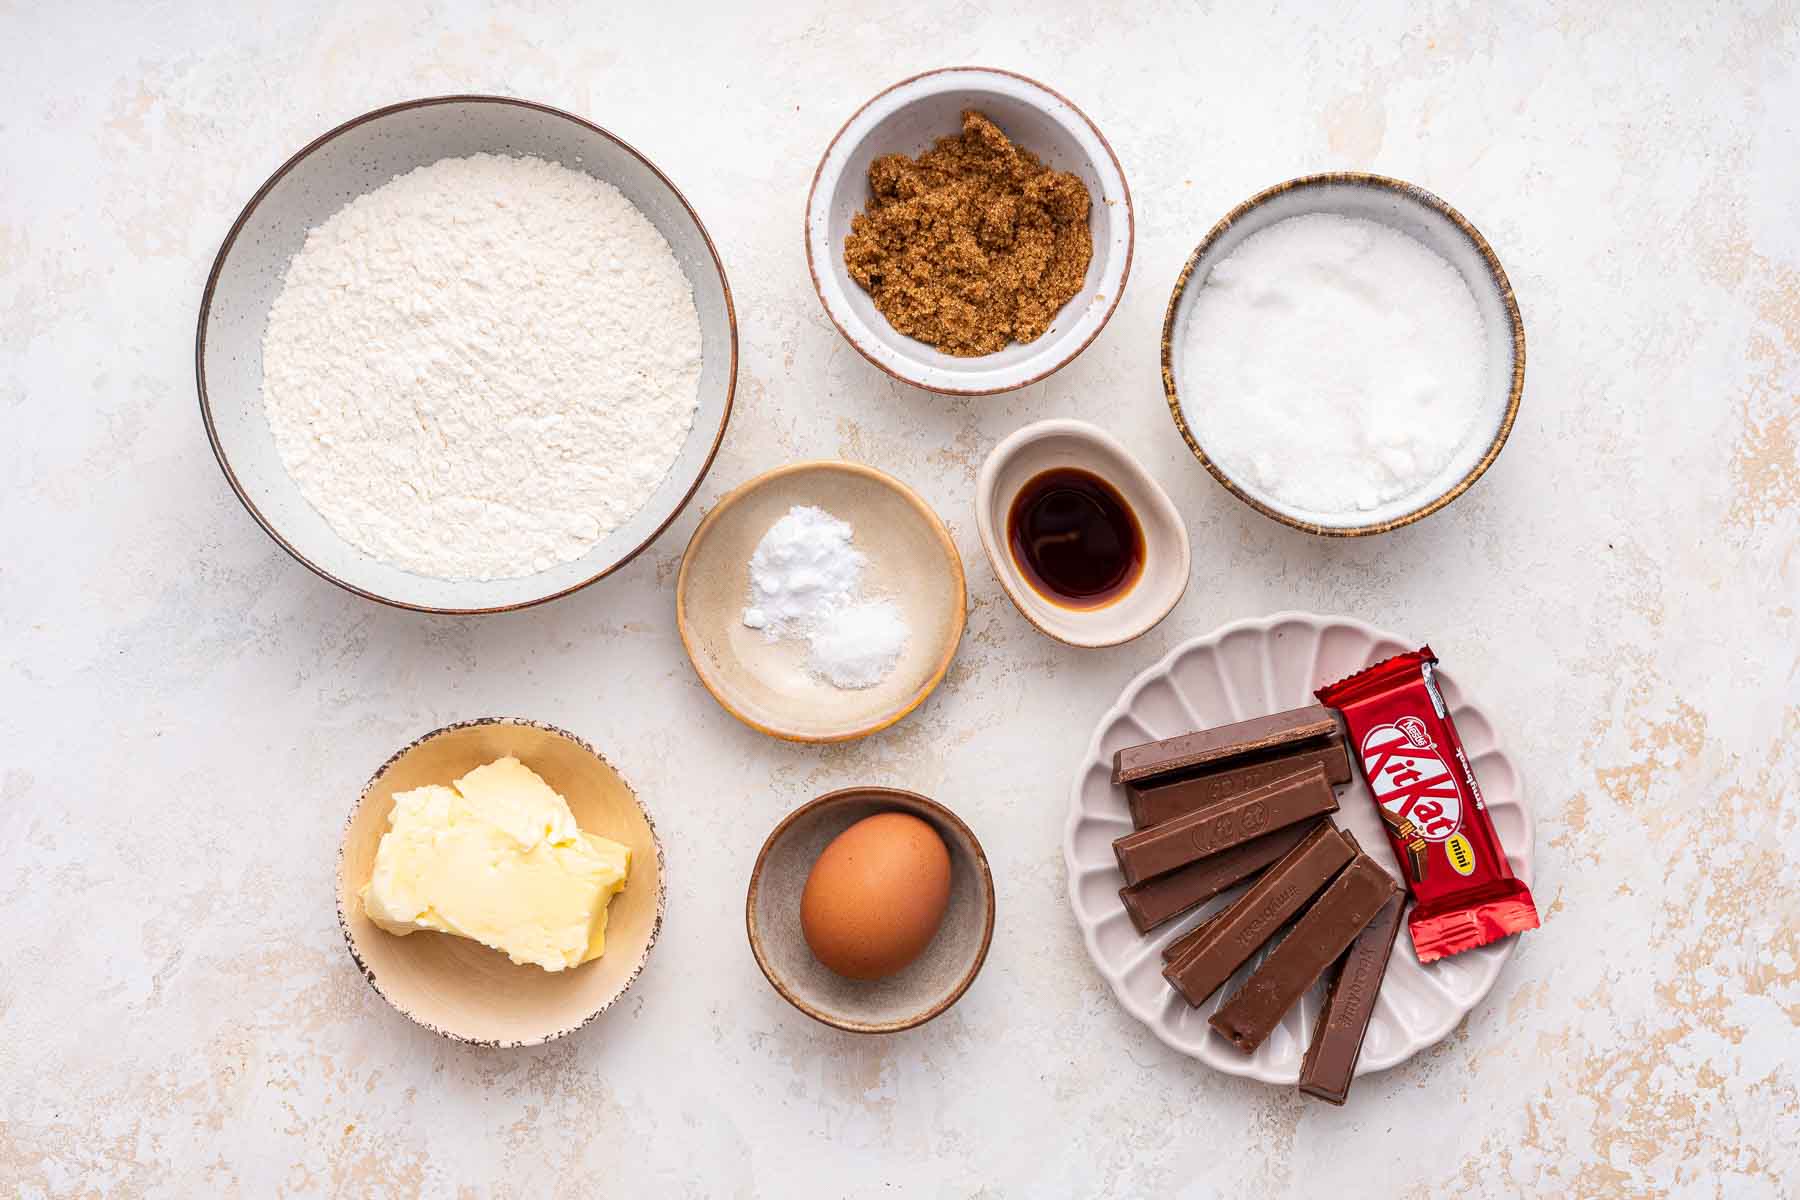 Ingredients for baking, including chocolate bars on white counter top.